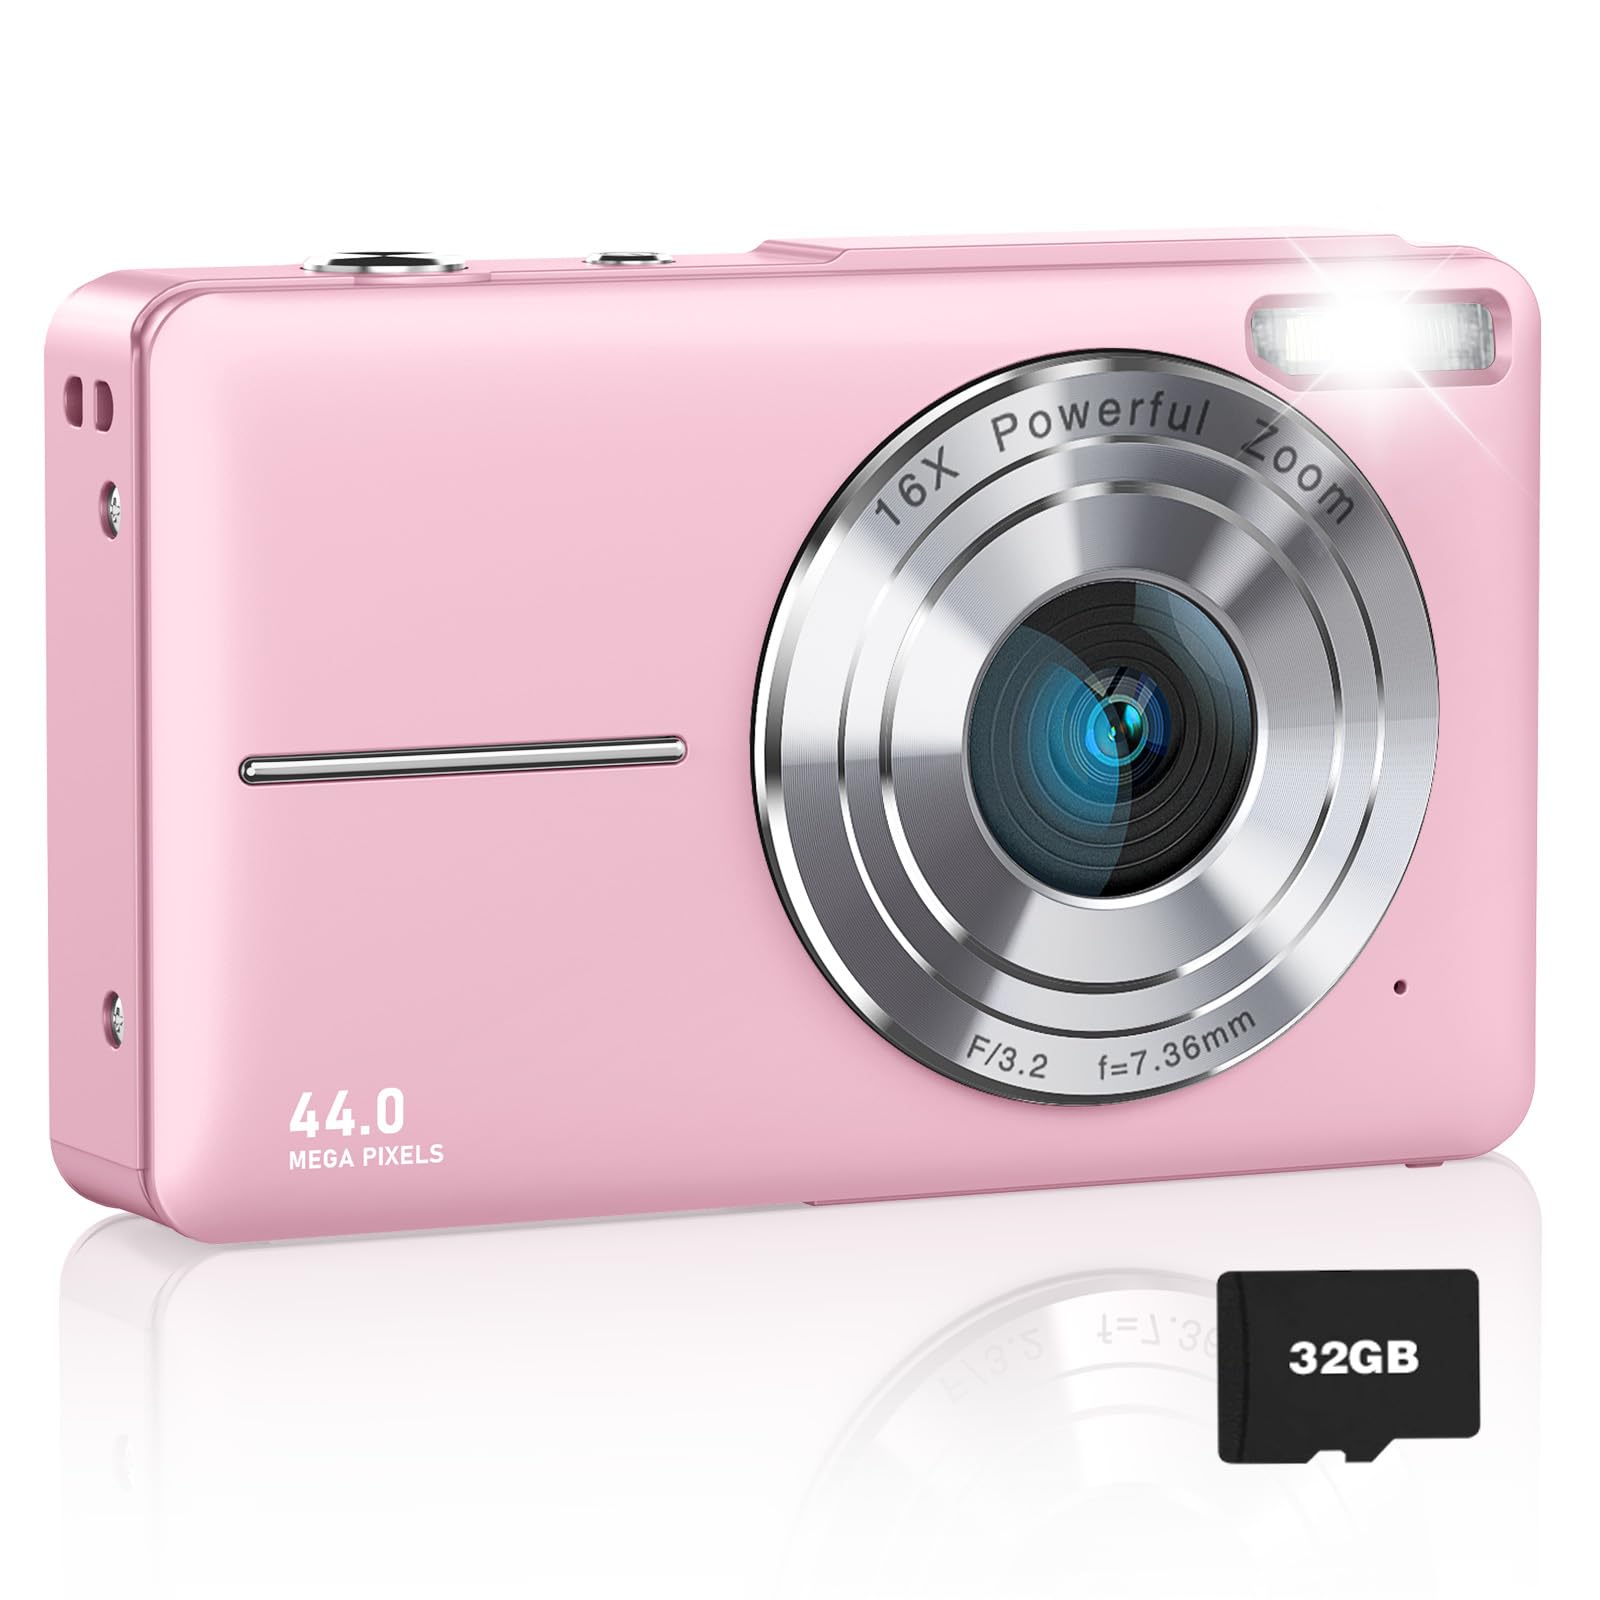 AiTechny Digital Camera for Kids, 1080P FHD Camera, 44MP Point and Shoot Digital Camera for Pictures with 32GB SD Card, 16X Zoom, Compact Small Vintage Camera Gifts for Teens Kids Boys Girls(Pink)